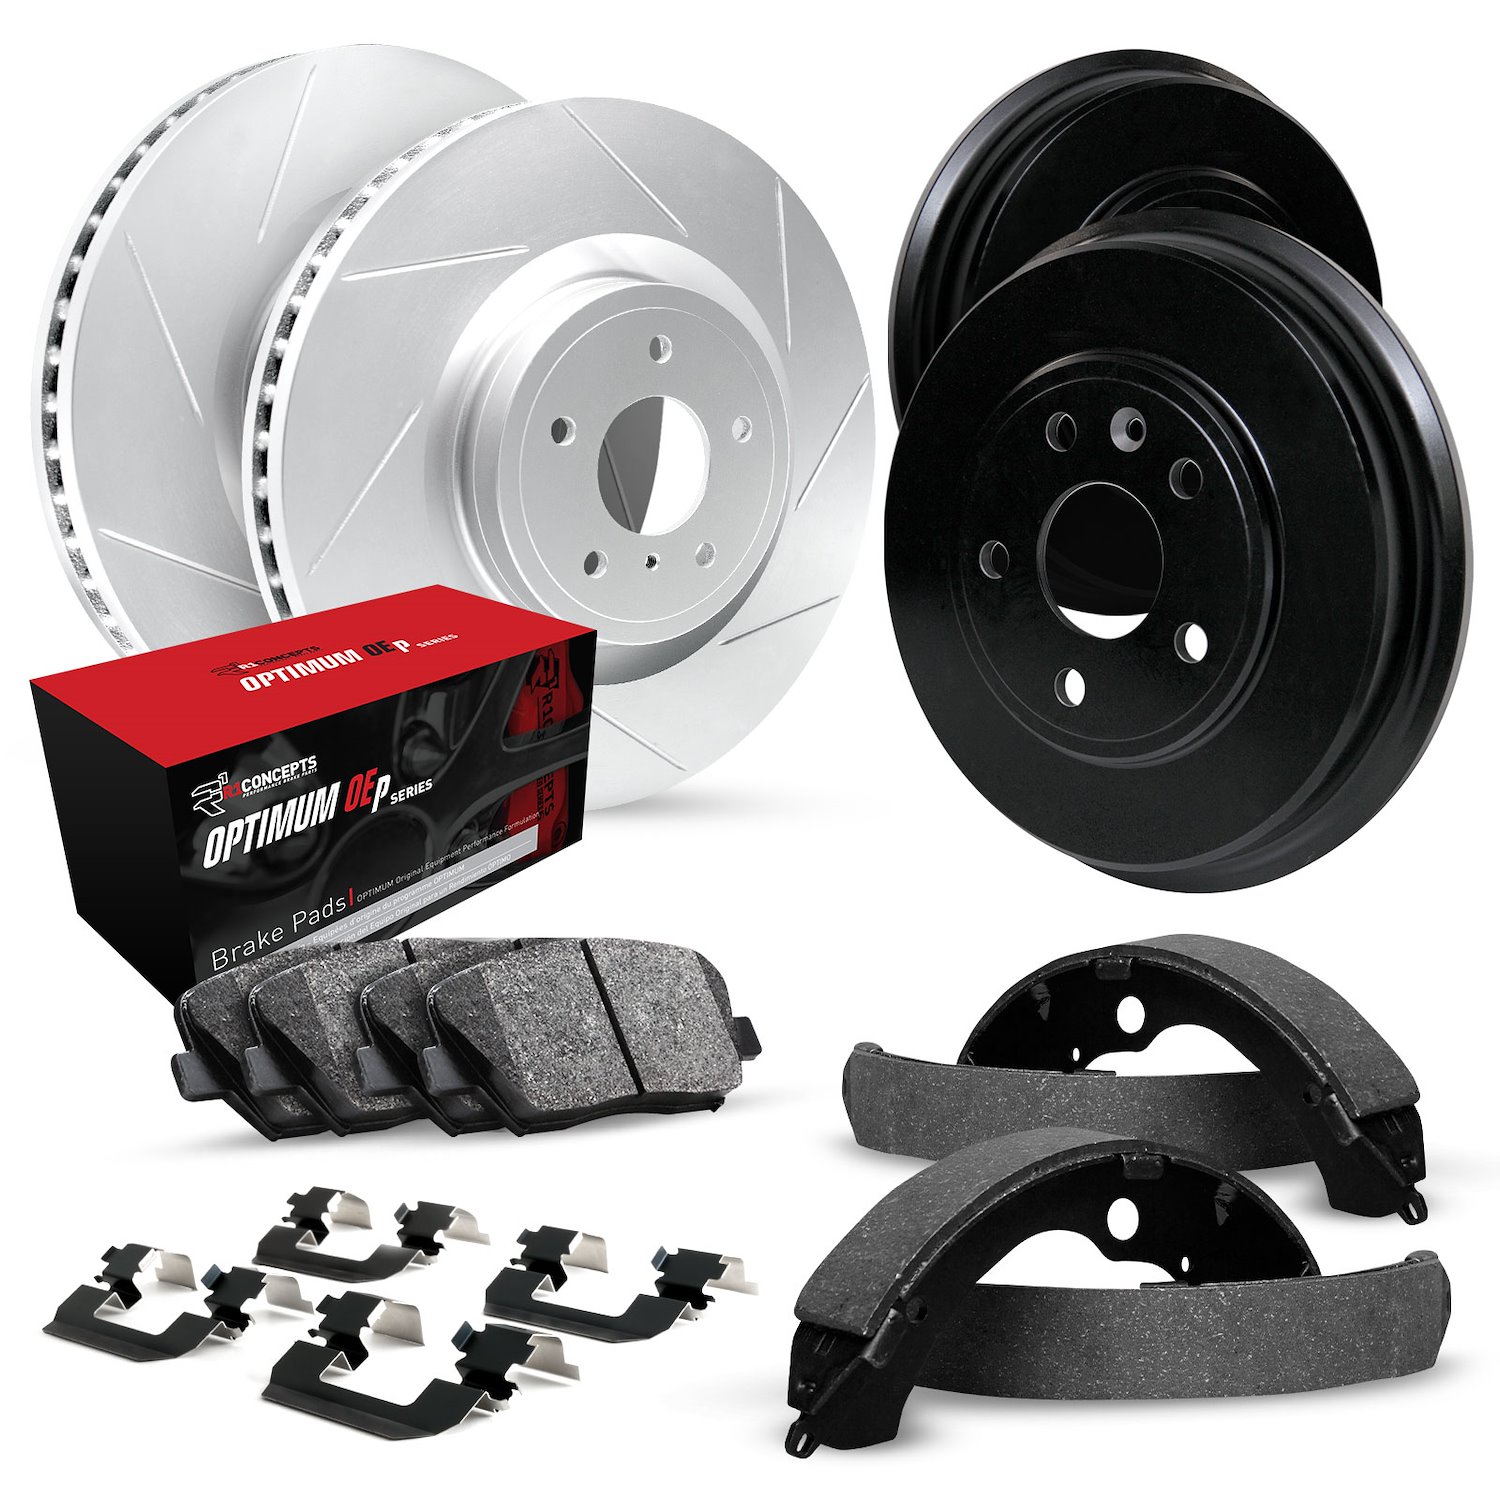 GEO-Carbon Slotted Brake Rotor & Drum Set w/Optimum OE Pads, Shoes, & Hardware, 1992-2000 GM, Position: Front & Rear